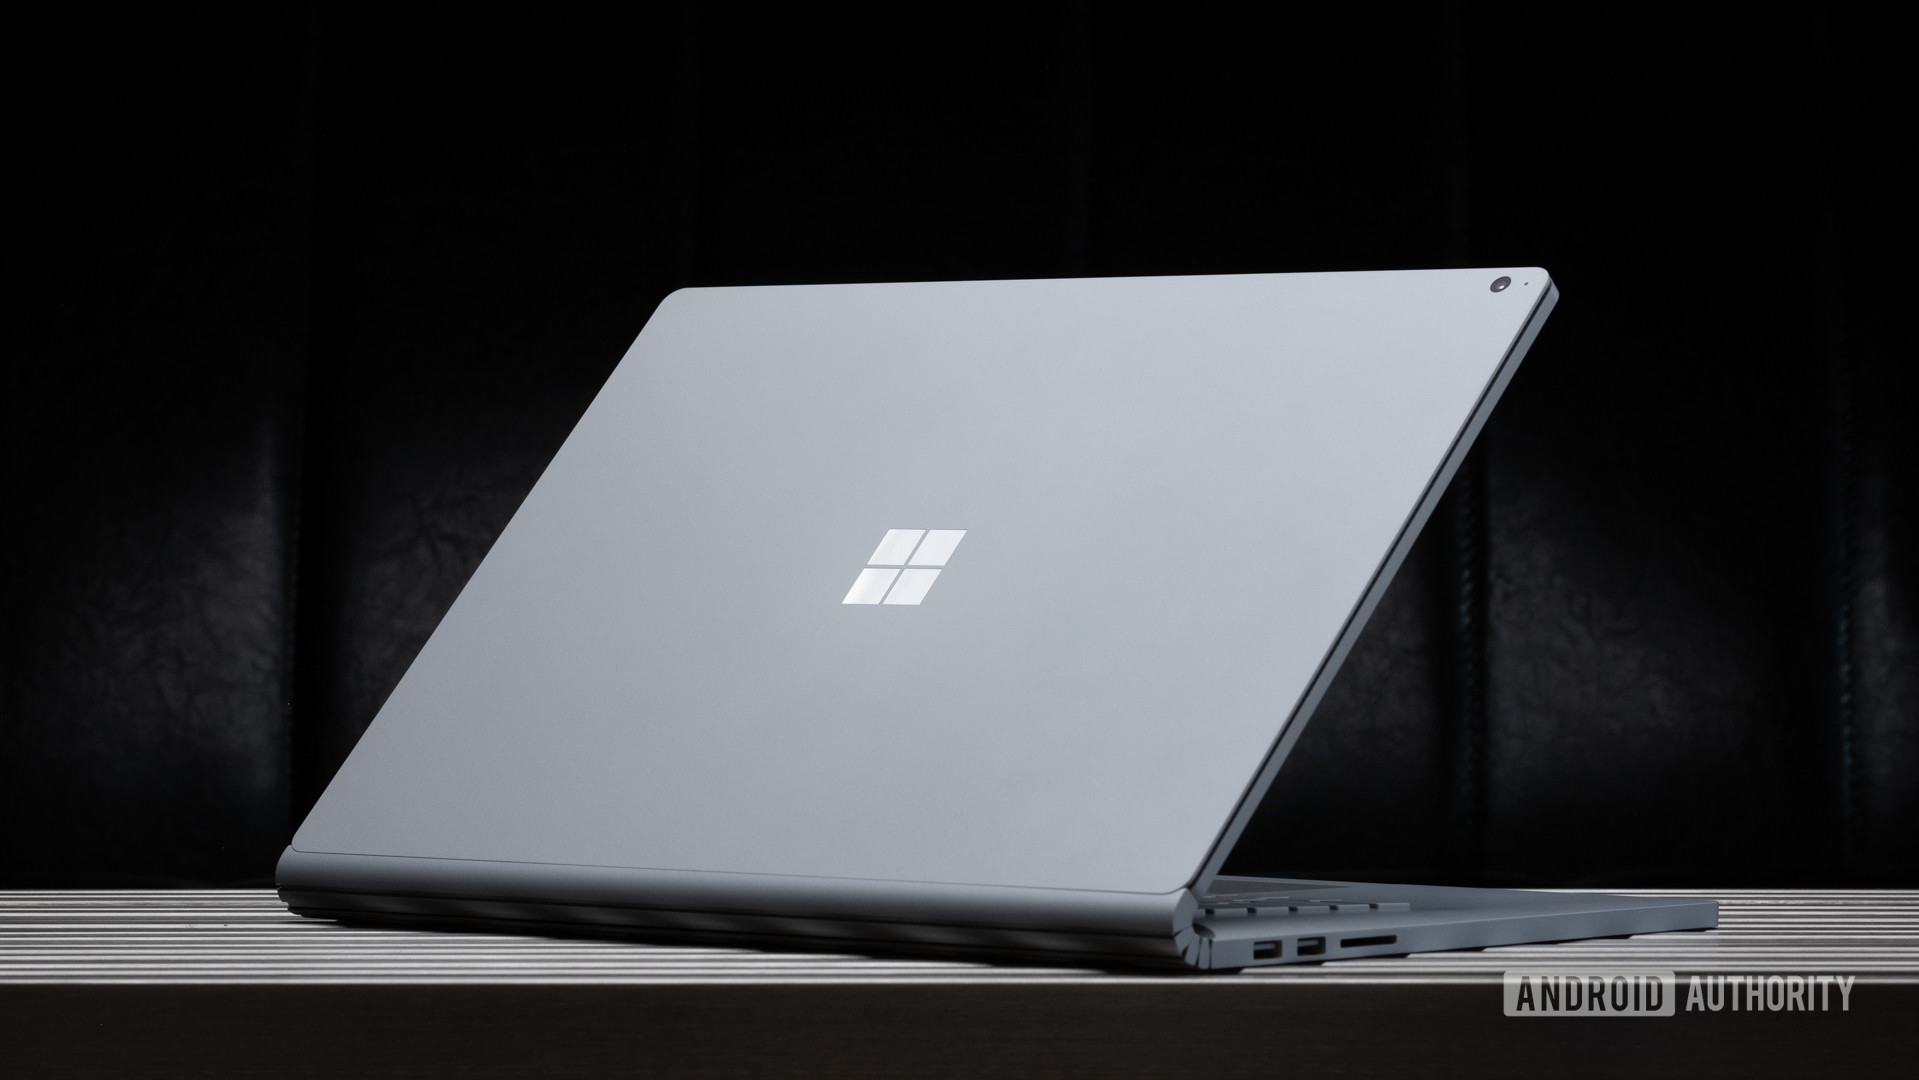 The best Microsoft Surface laptops and tablets to get in 2022